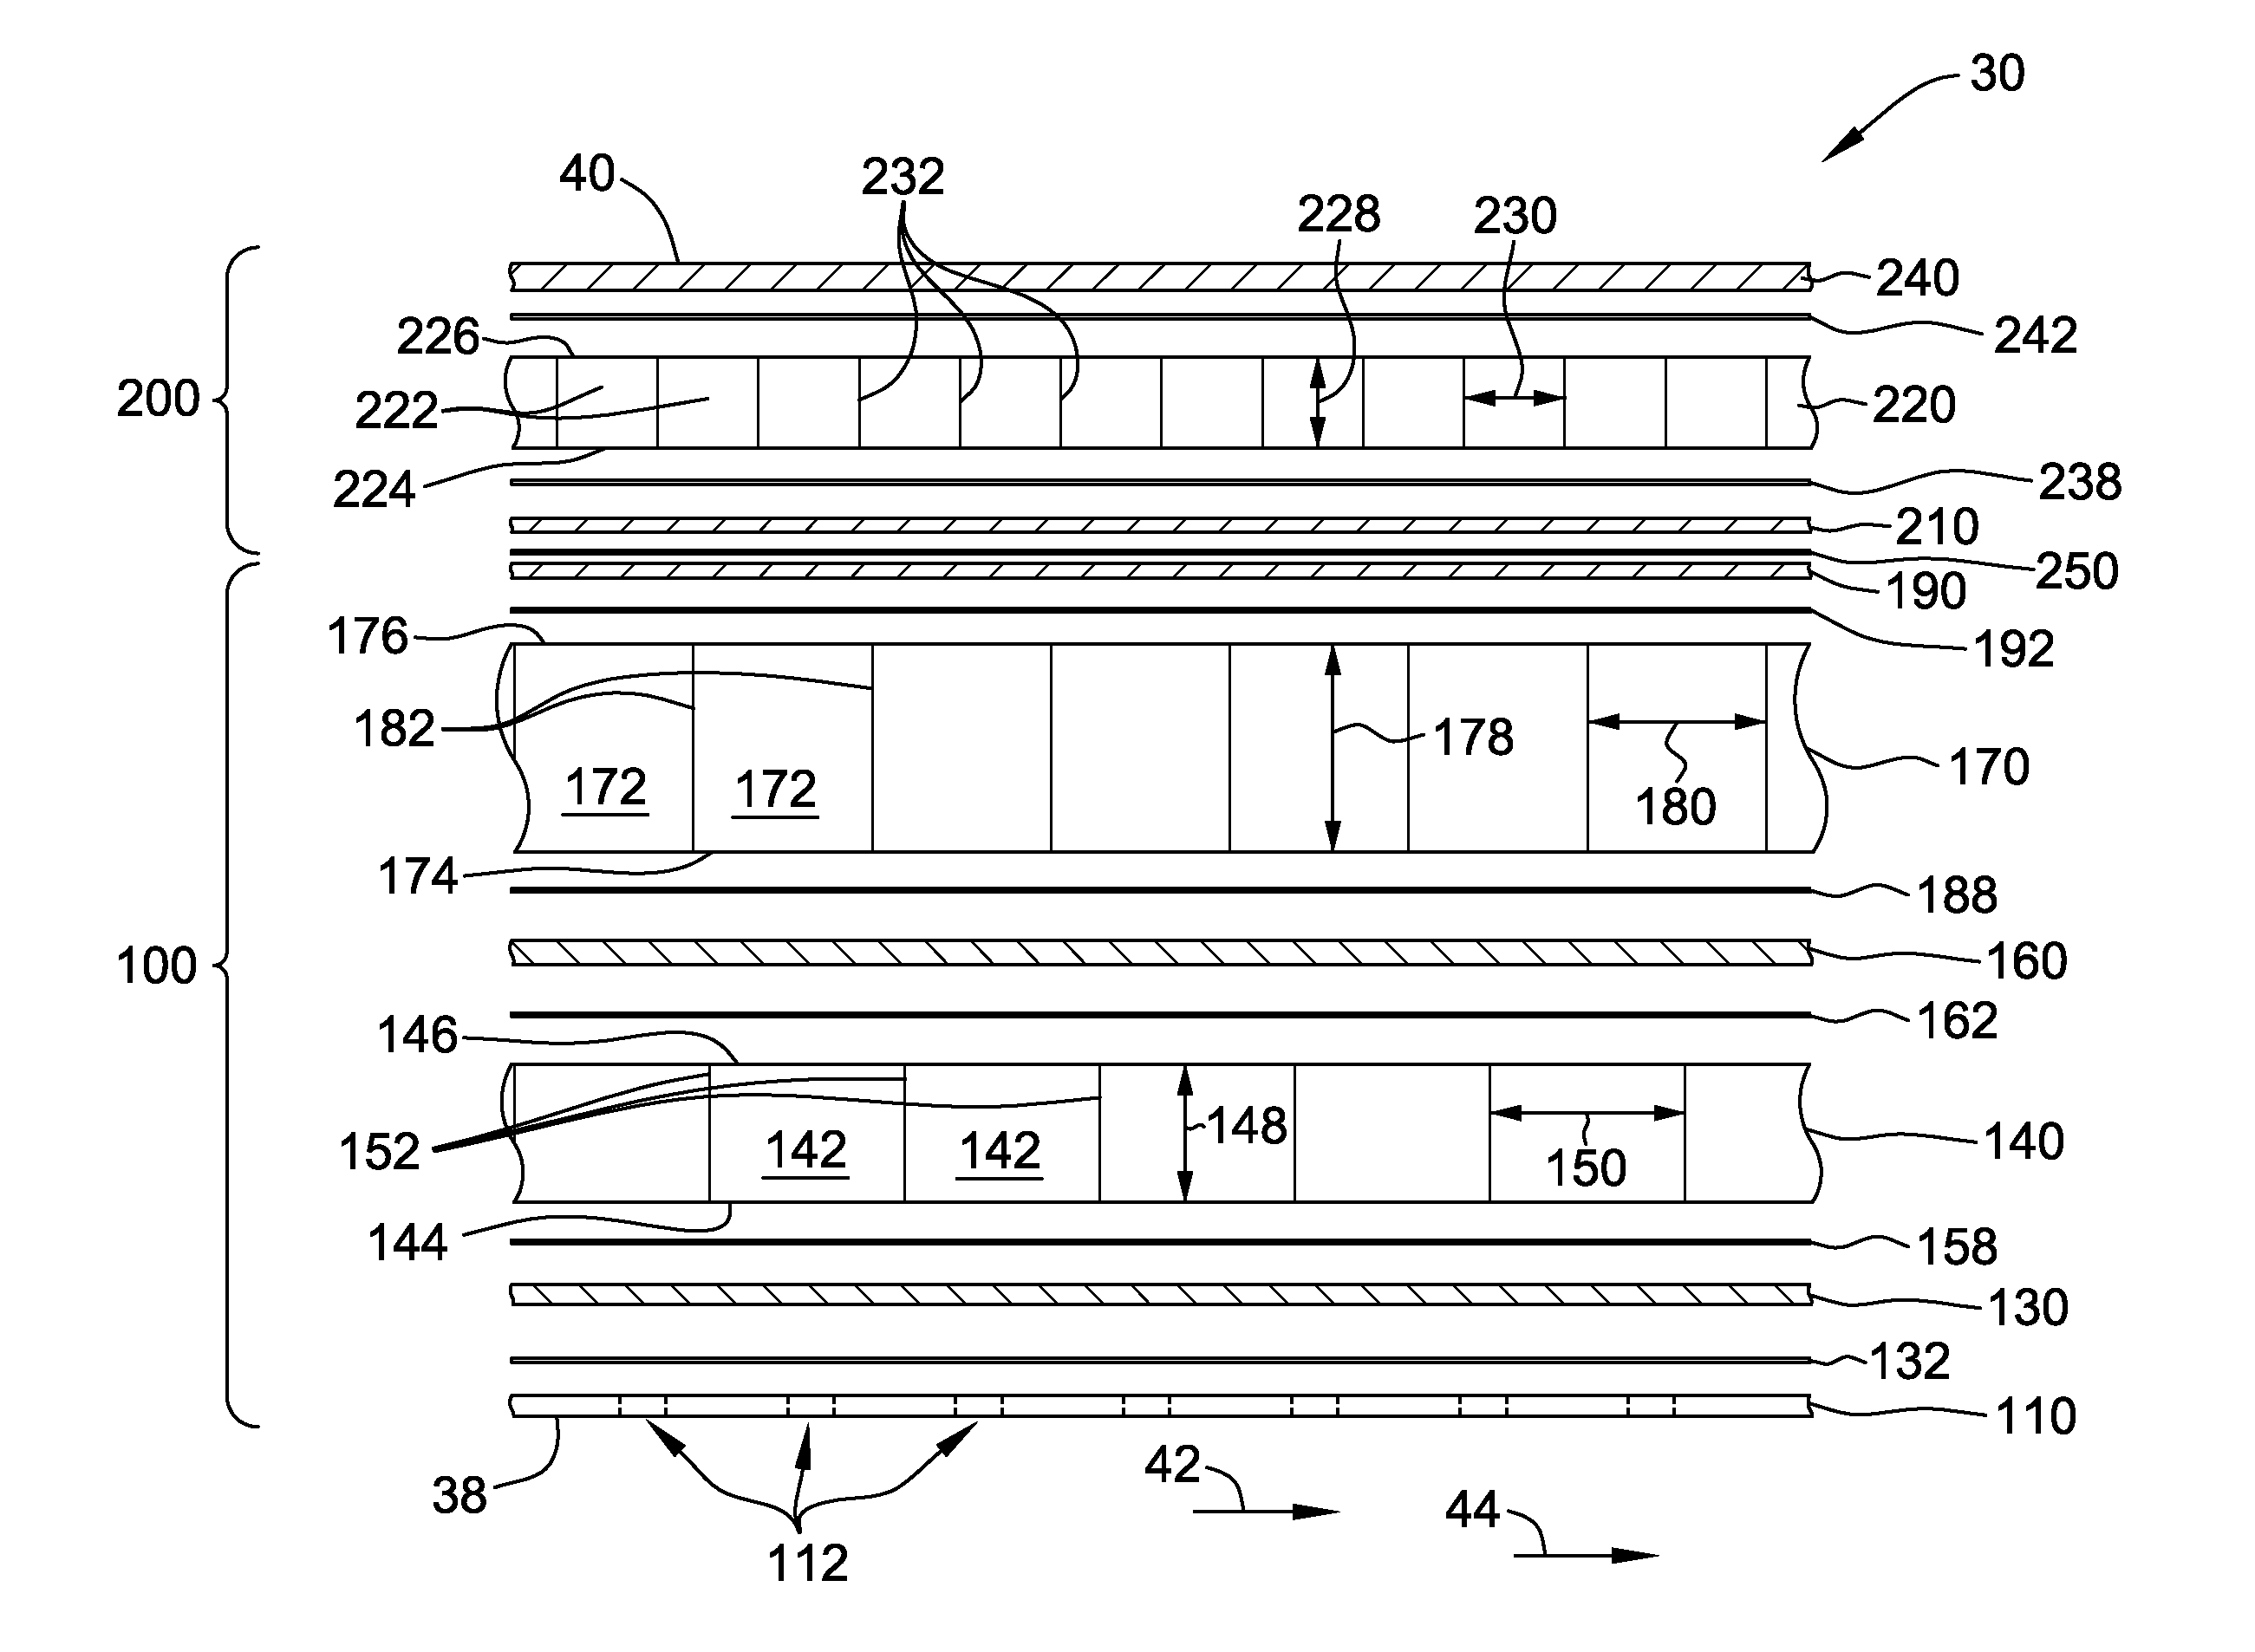 Methods and apparatus for noise attenuation in an engine nacelle